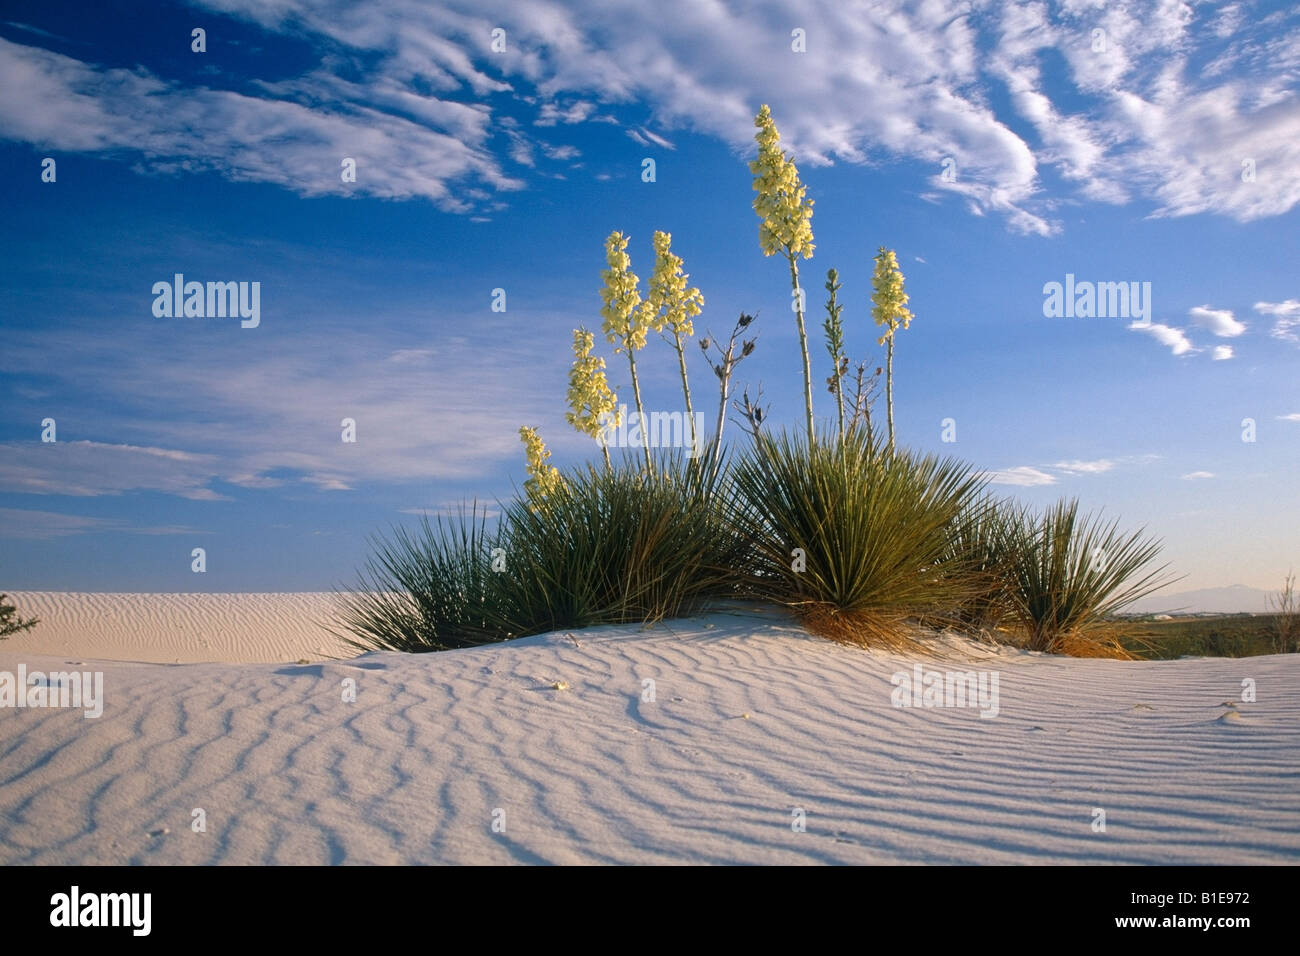 Blooming Yucca Plant in middle of windblown sand dunes White Sand Dunes Nat Monument New Mexico USA Stock Photo